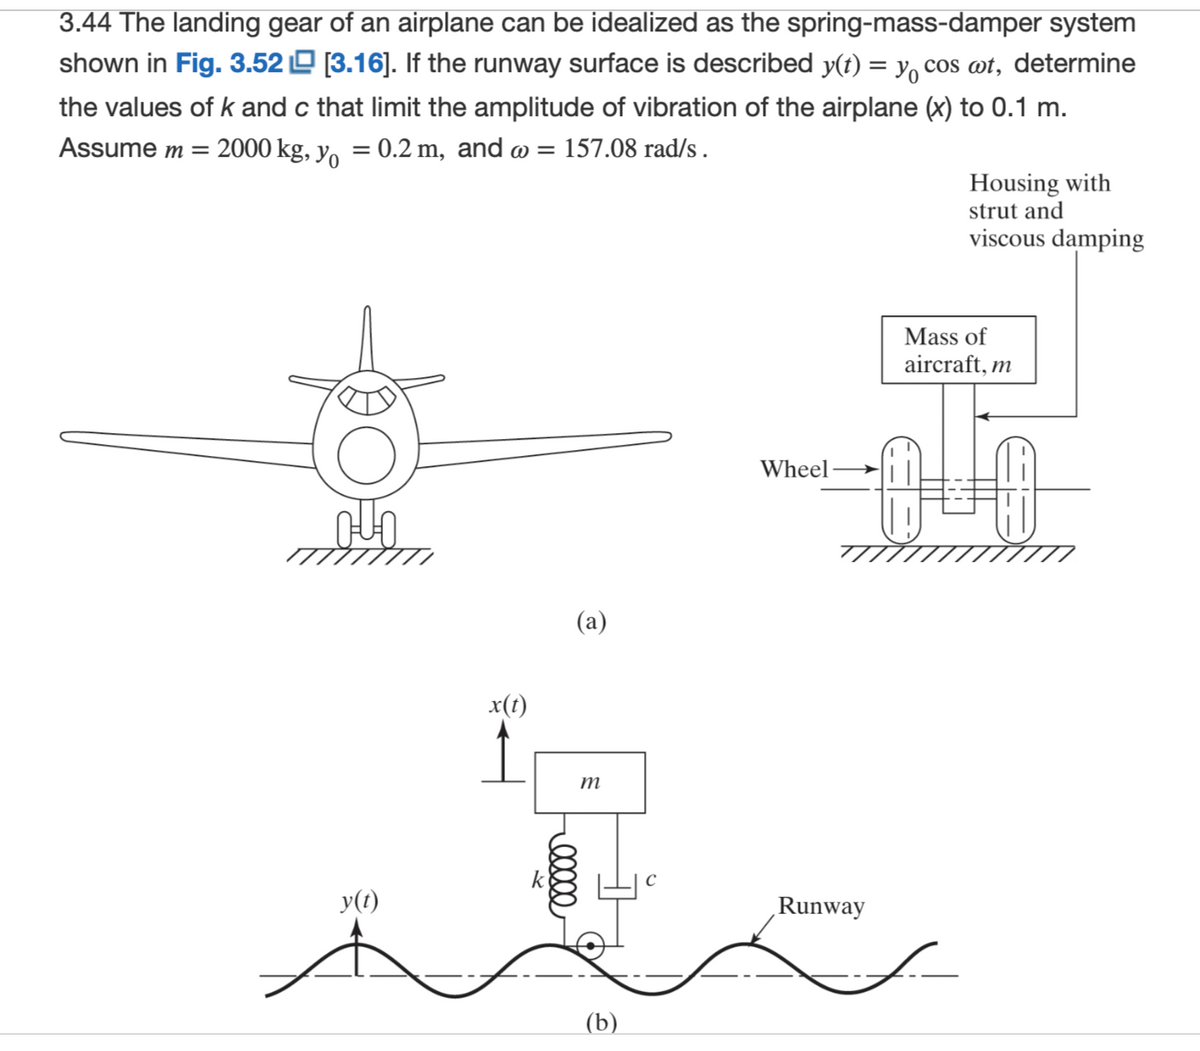 3.44 The landing gear of an airplane can be idealized as the spring-mass-damper system
shown in Fig. 3.52 [3.16]. If the runway surface is described y(t) = y cos wt, determine
the values of k and c that limit the amplitude of vibration of the airplane (x) to 0.1 m.
y = 0.2 m, and @ = 157.08 rad/s .
Assume m = 2000 kg,
YOON
y(t)
x(t)
(a)
00000
m
(b)
Wheel
Runway
Housing with
strut and
viscous damping
Mass of
aircraft, m
0